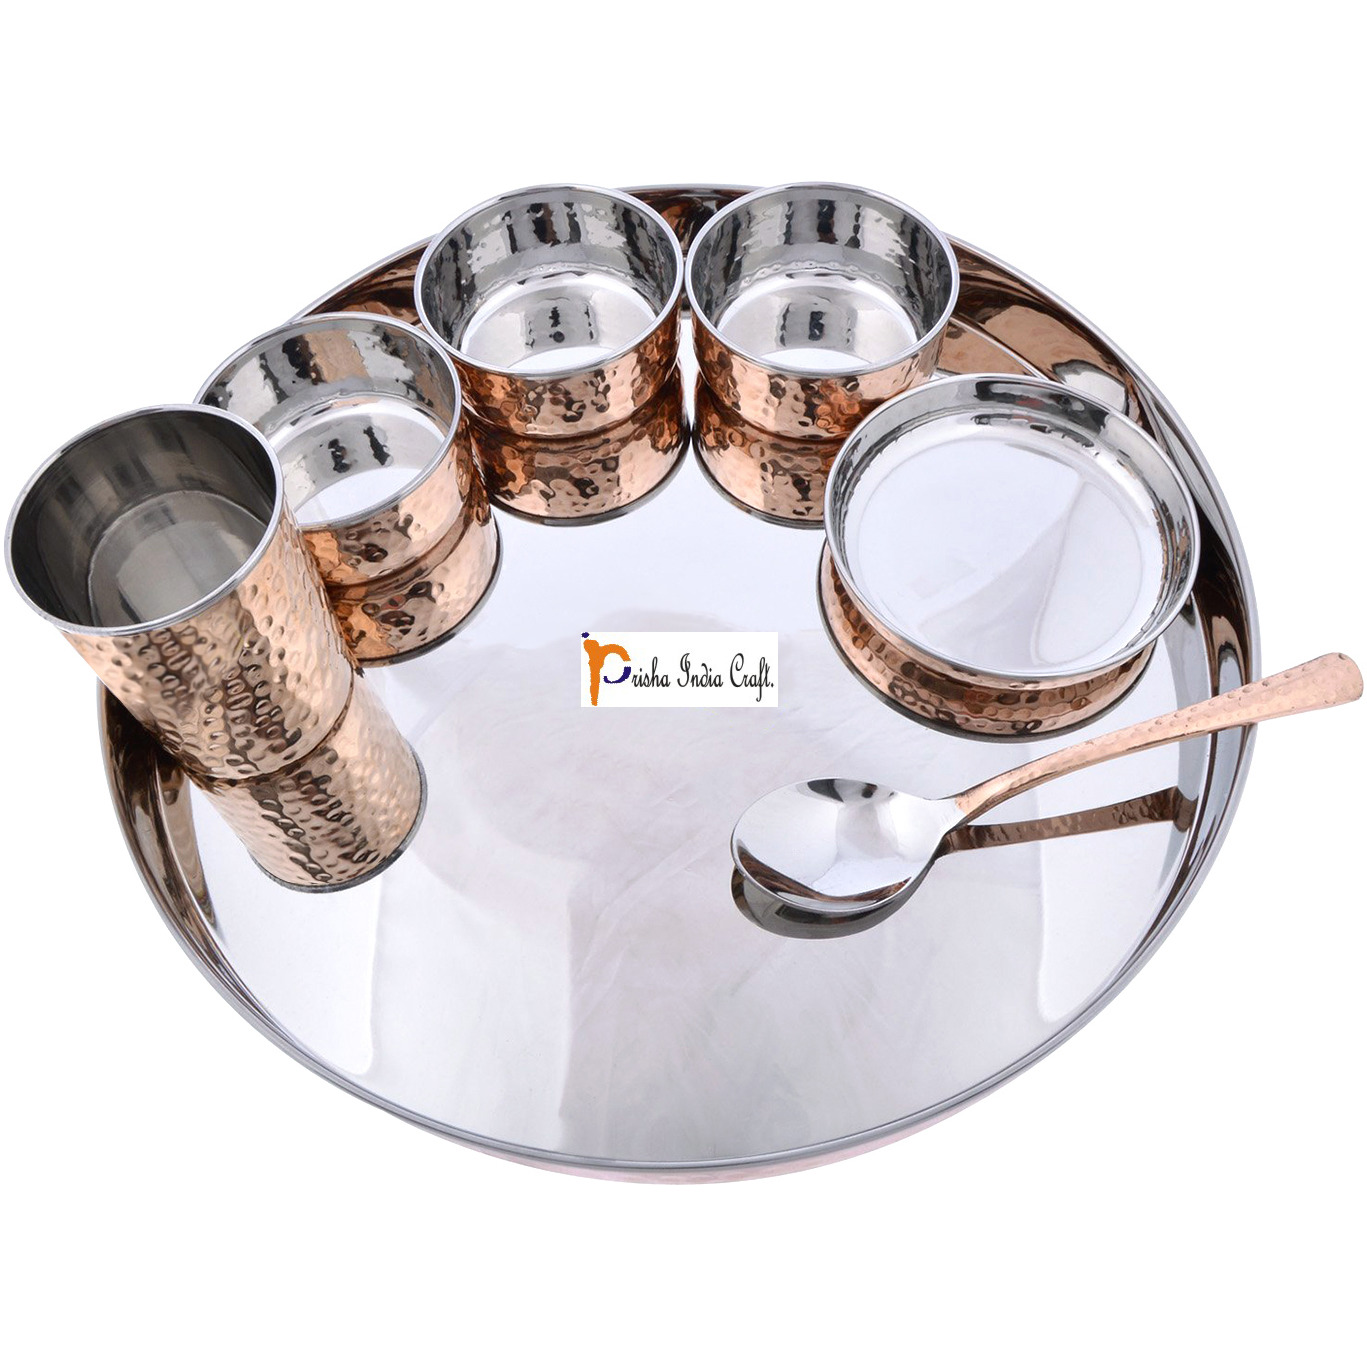 Prisha India Craft B. Set of 3 Dinnerware Traditional Stainless Steel Copper Dinner Set of Thali Plate, Bowls, Glass and Spoon, Dia 13  With 1 Luxury Style Pitcher Jug - Christmas Gift